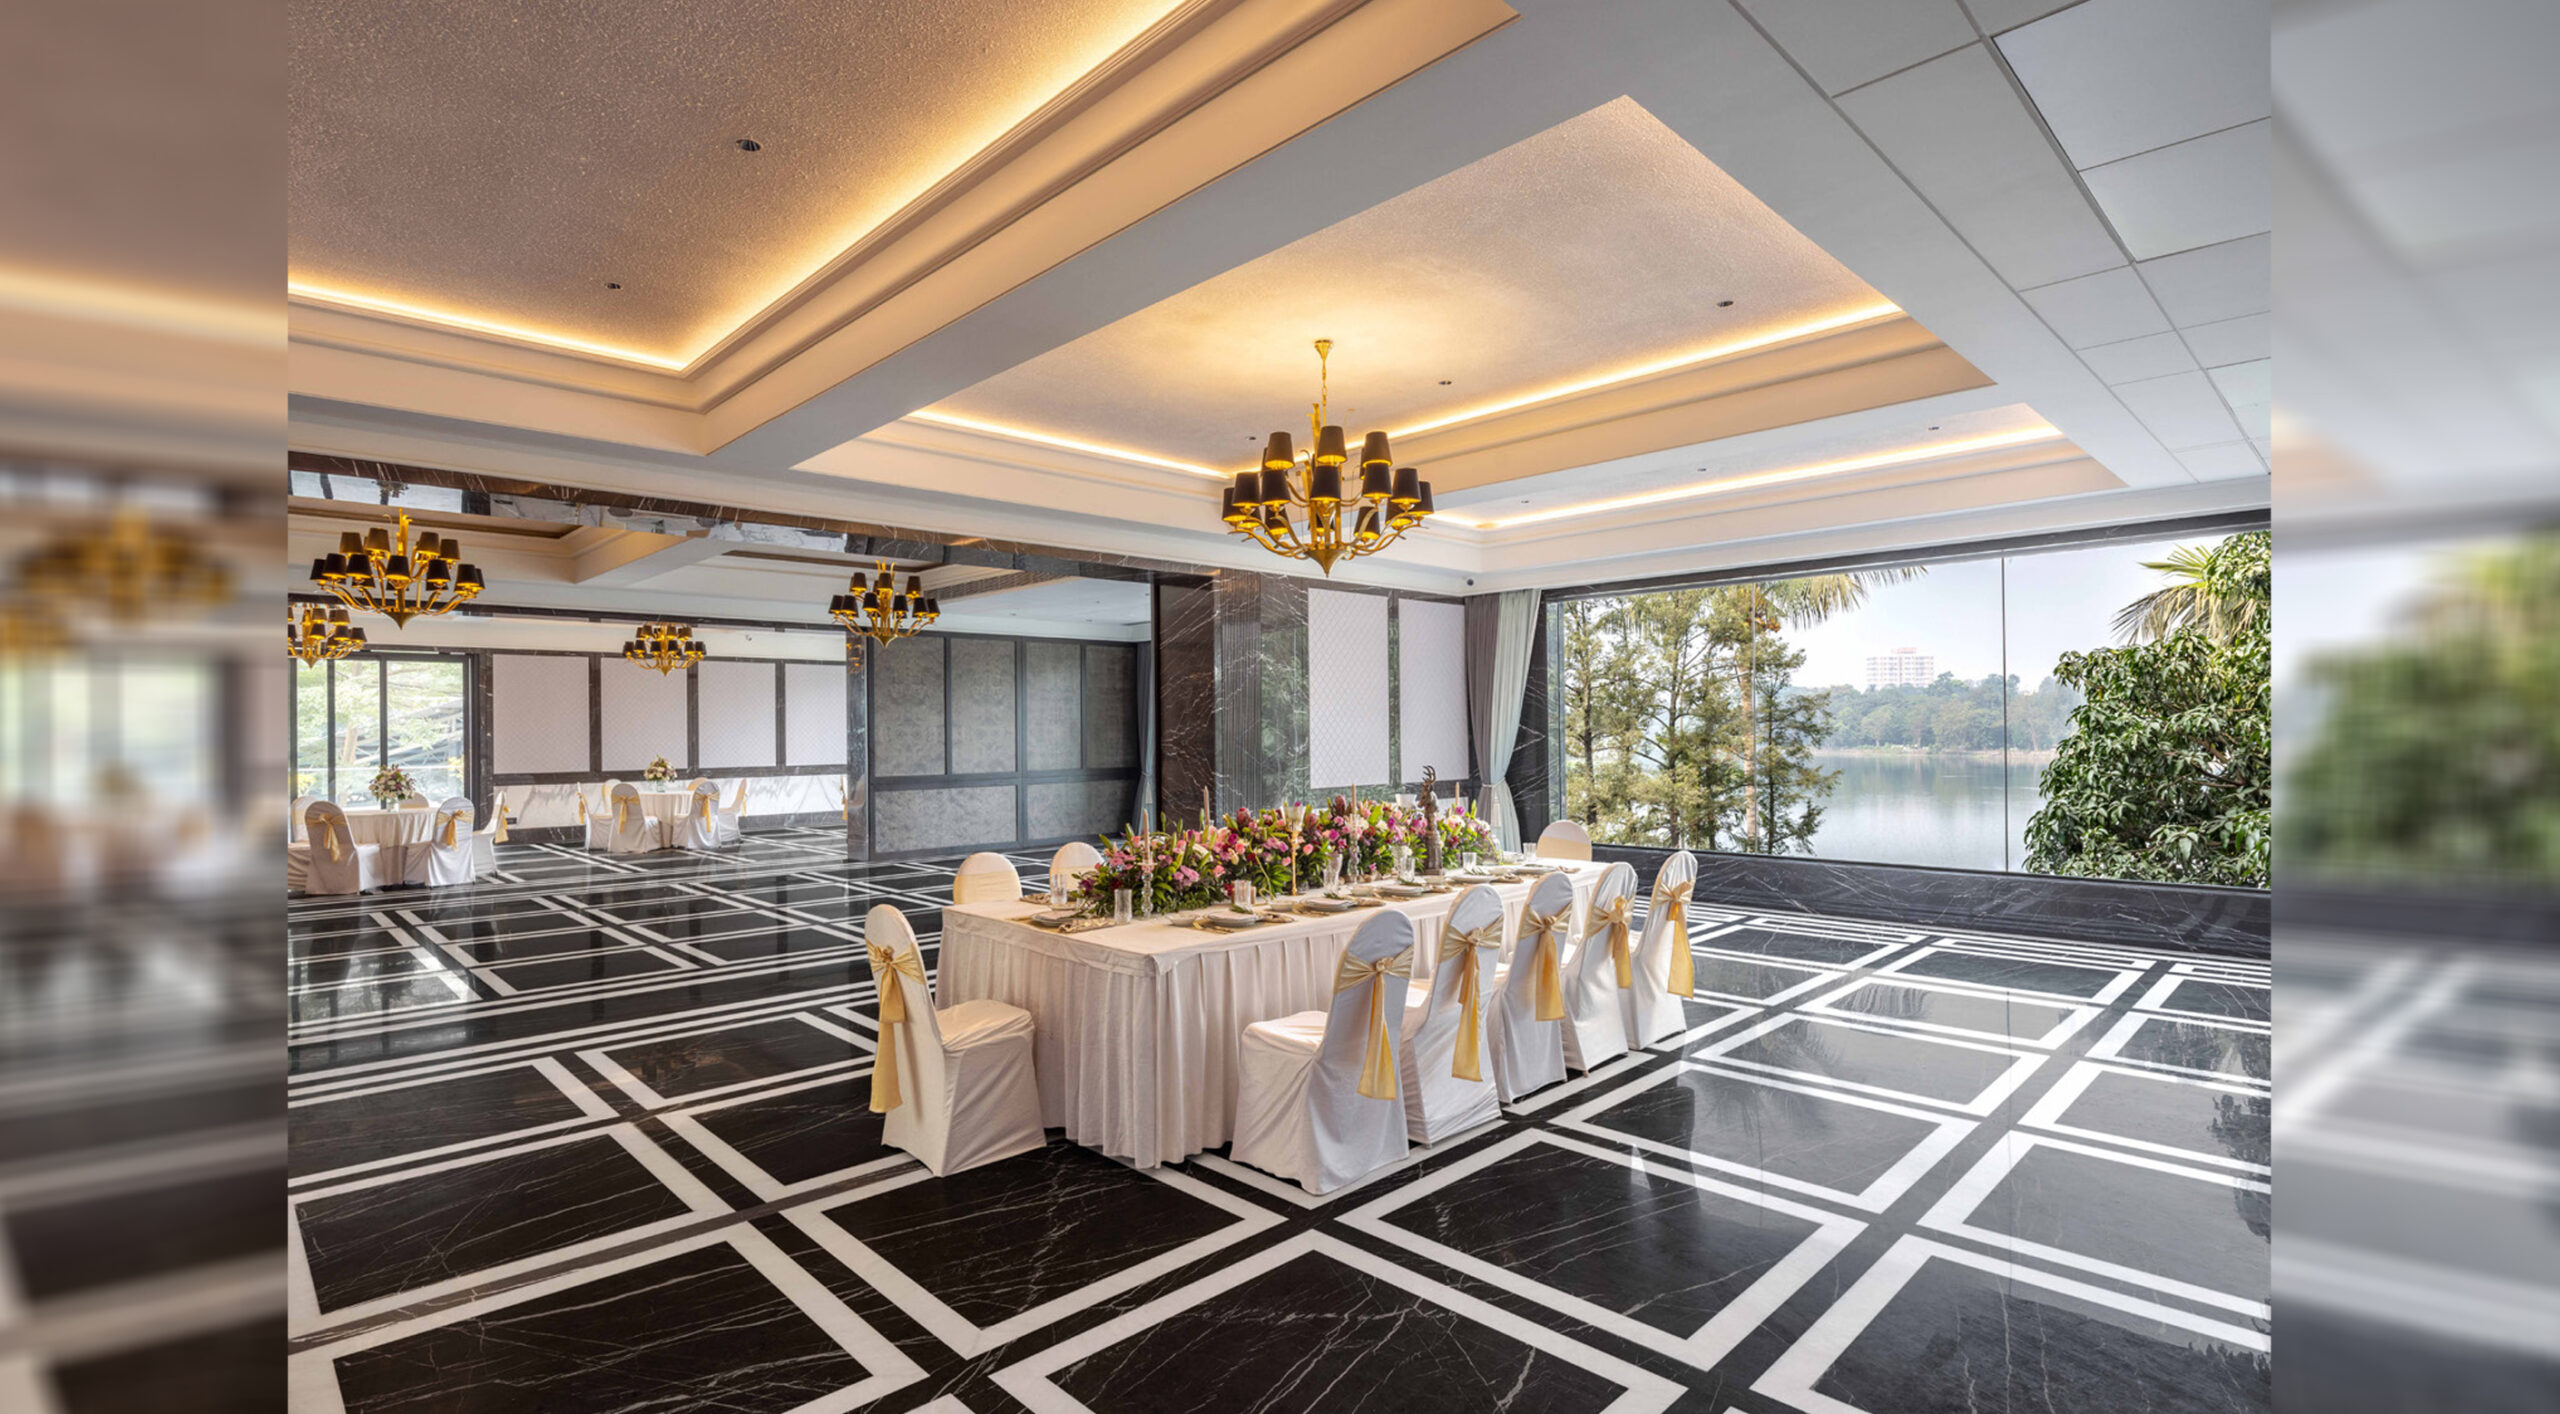 A glimpse inside the iconic Bengal Rowing Club’s luxurious banquet hall